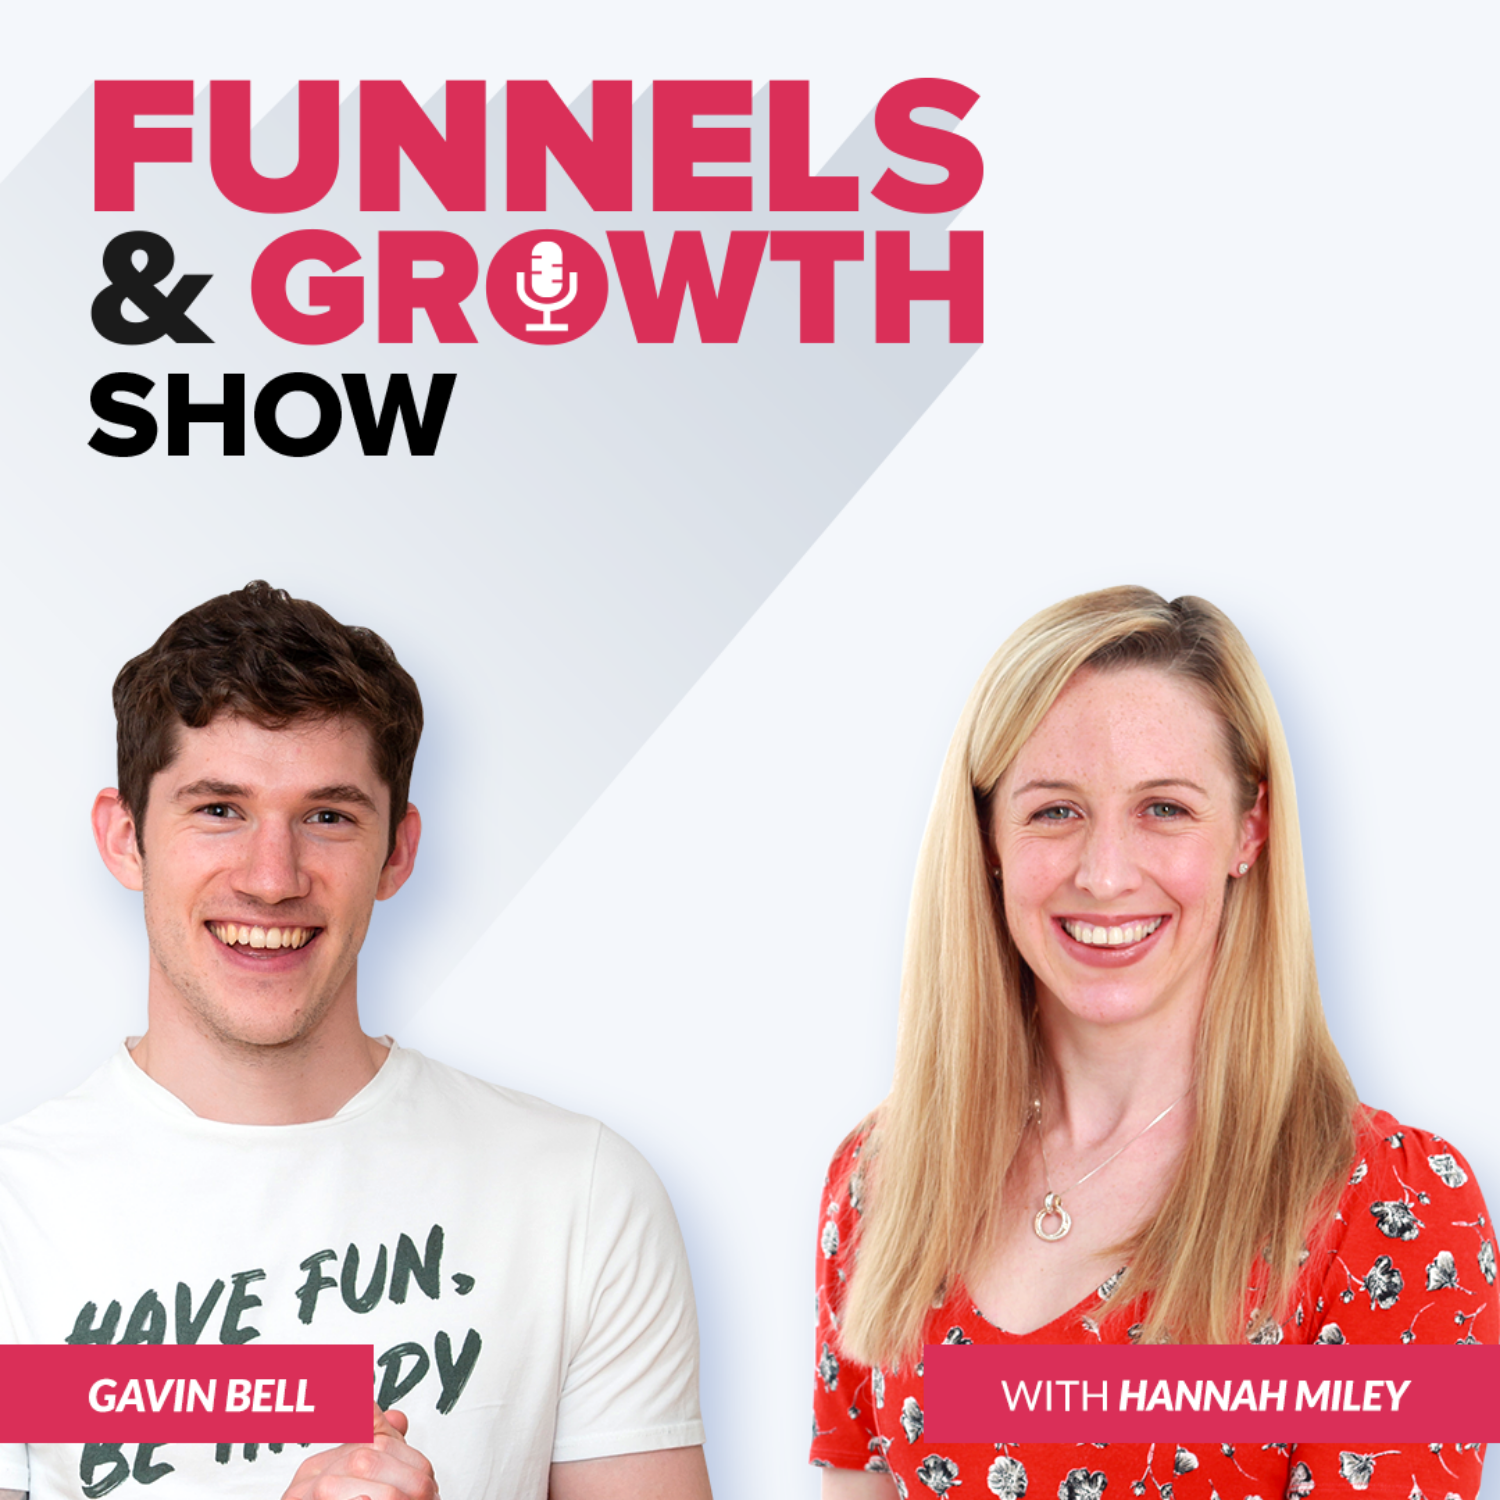 Artwork for podcast Funnels & Business Growth Podcast